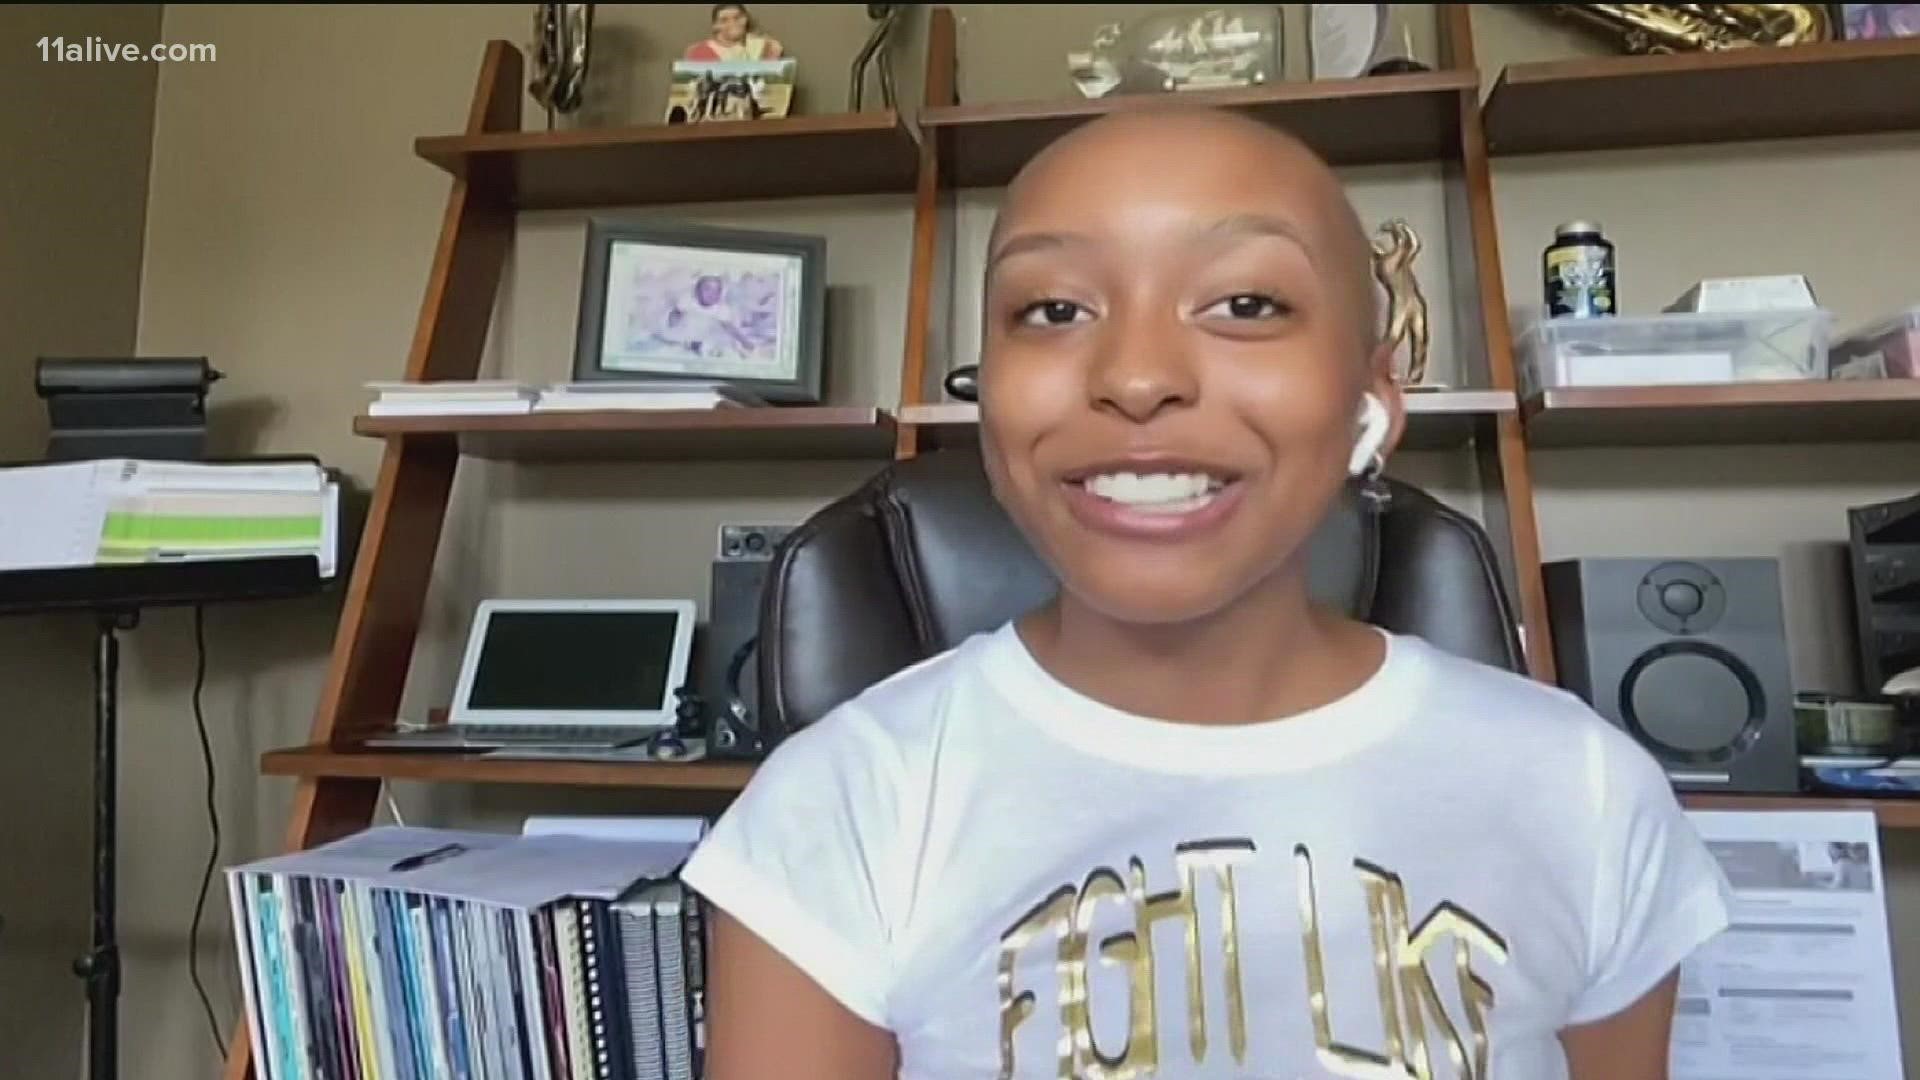 Cancer never stopped this teenager in metro Atlanta from helping others.